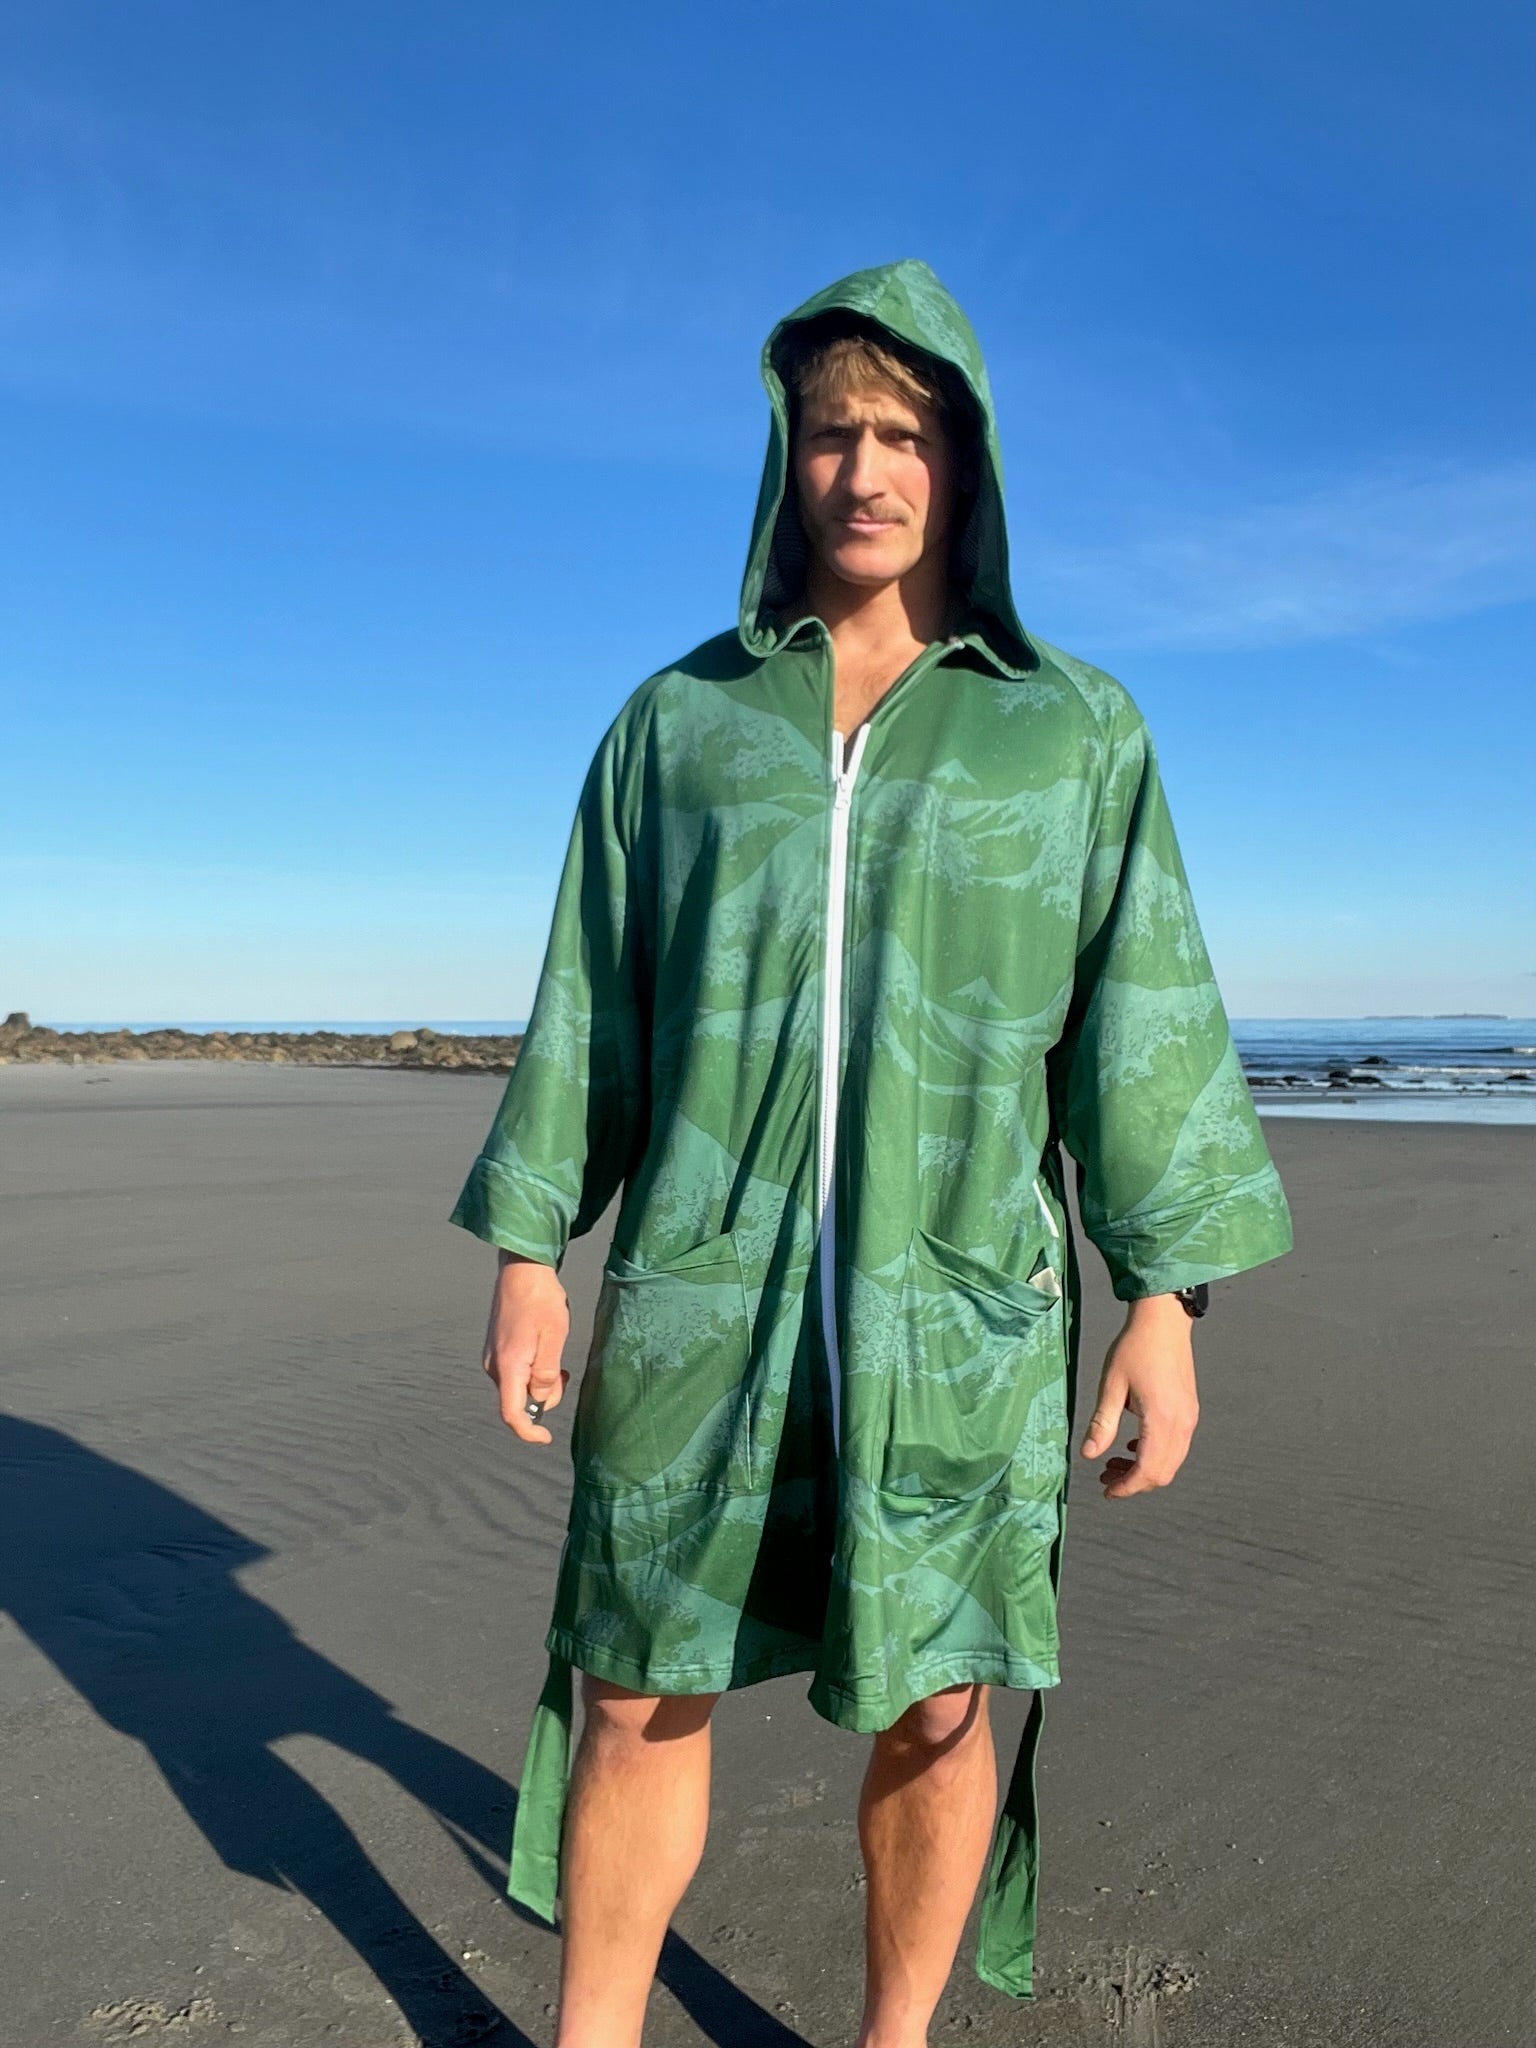 Winter Wave: Fleece Lined Change AnyWear Robe – Plover Robes